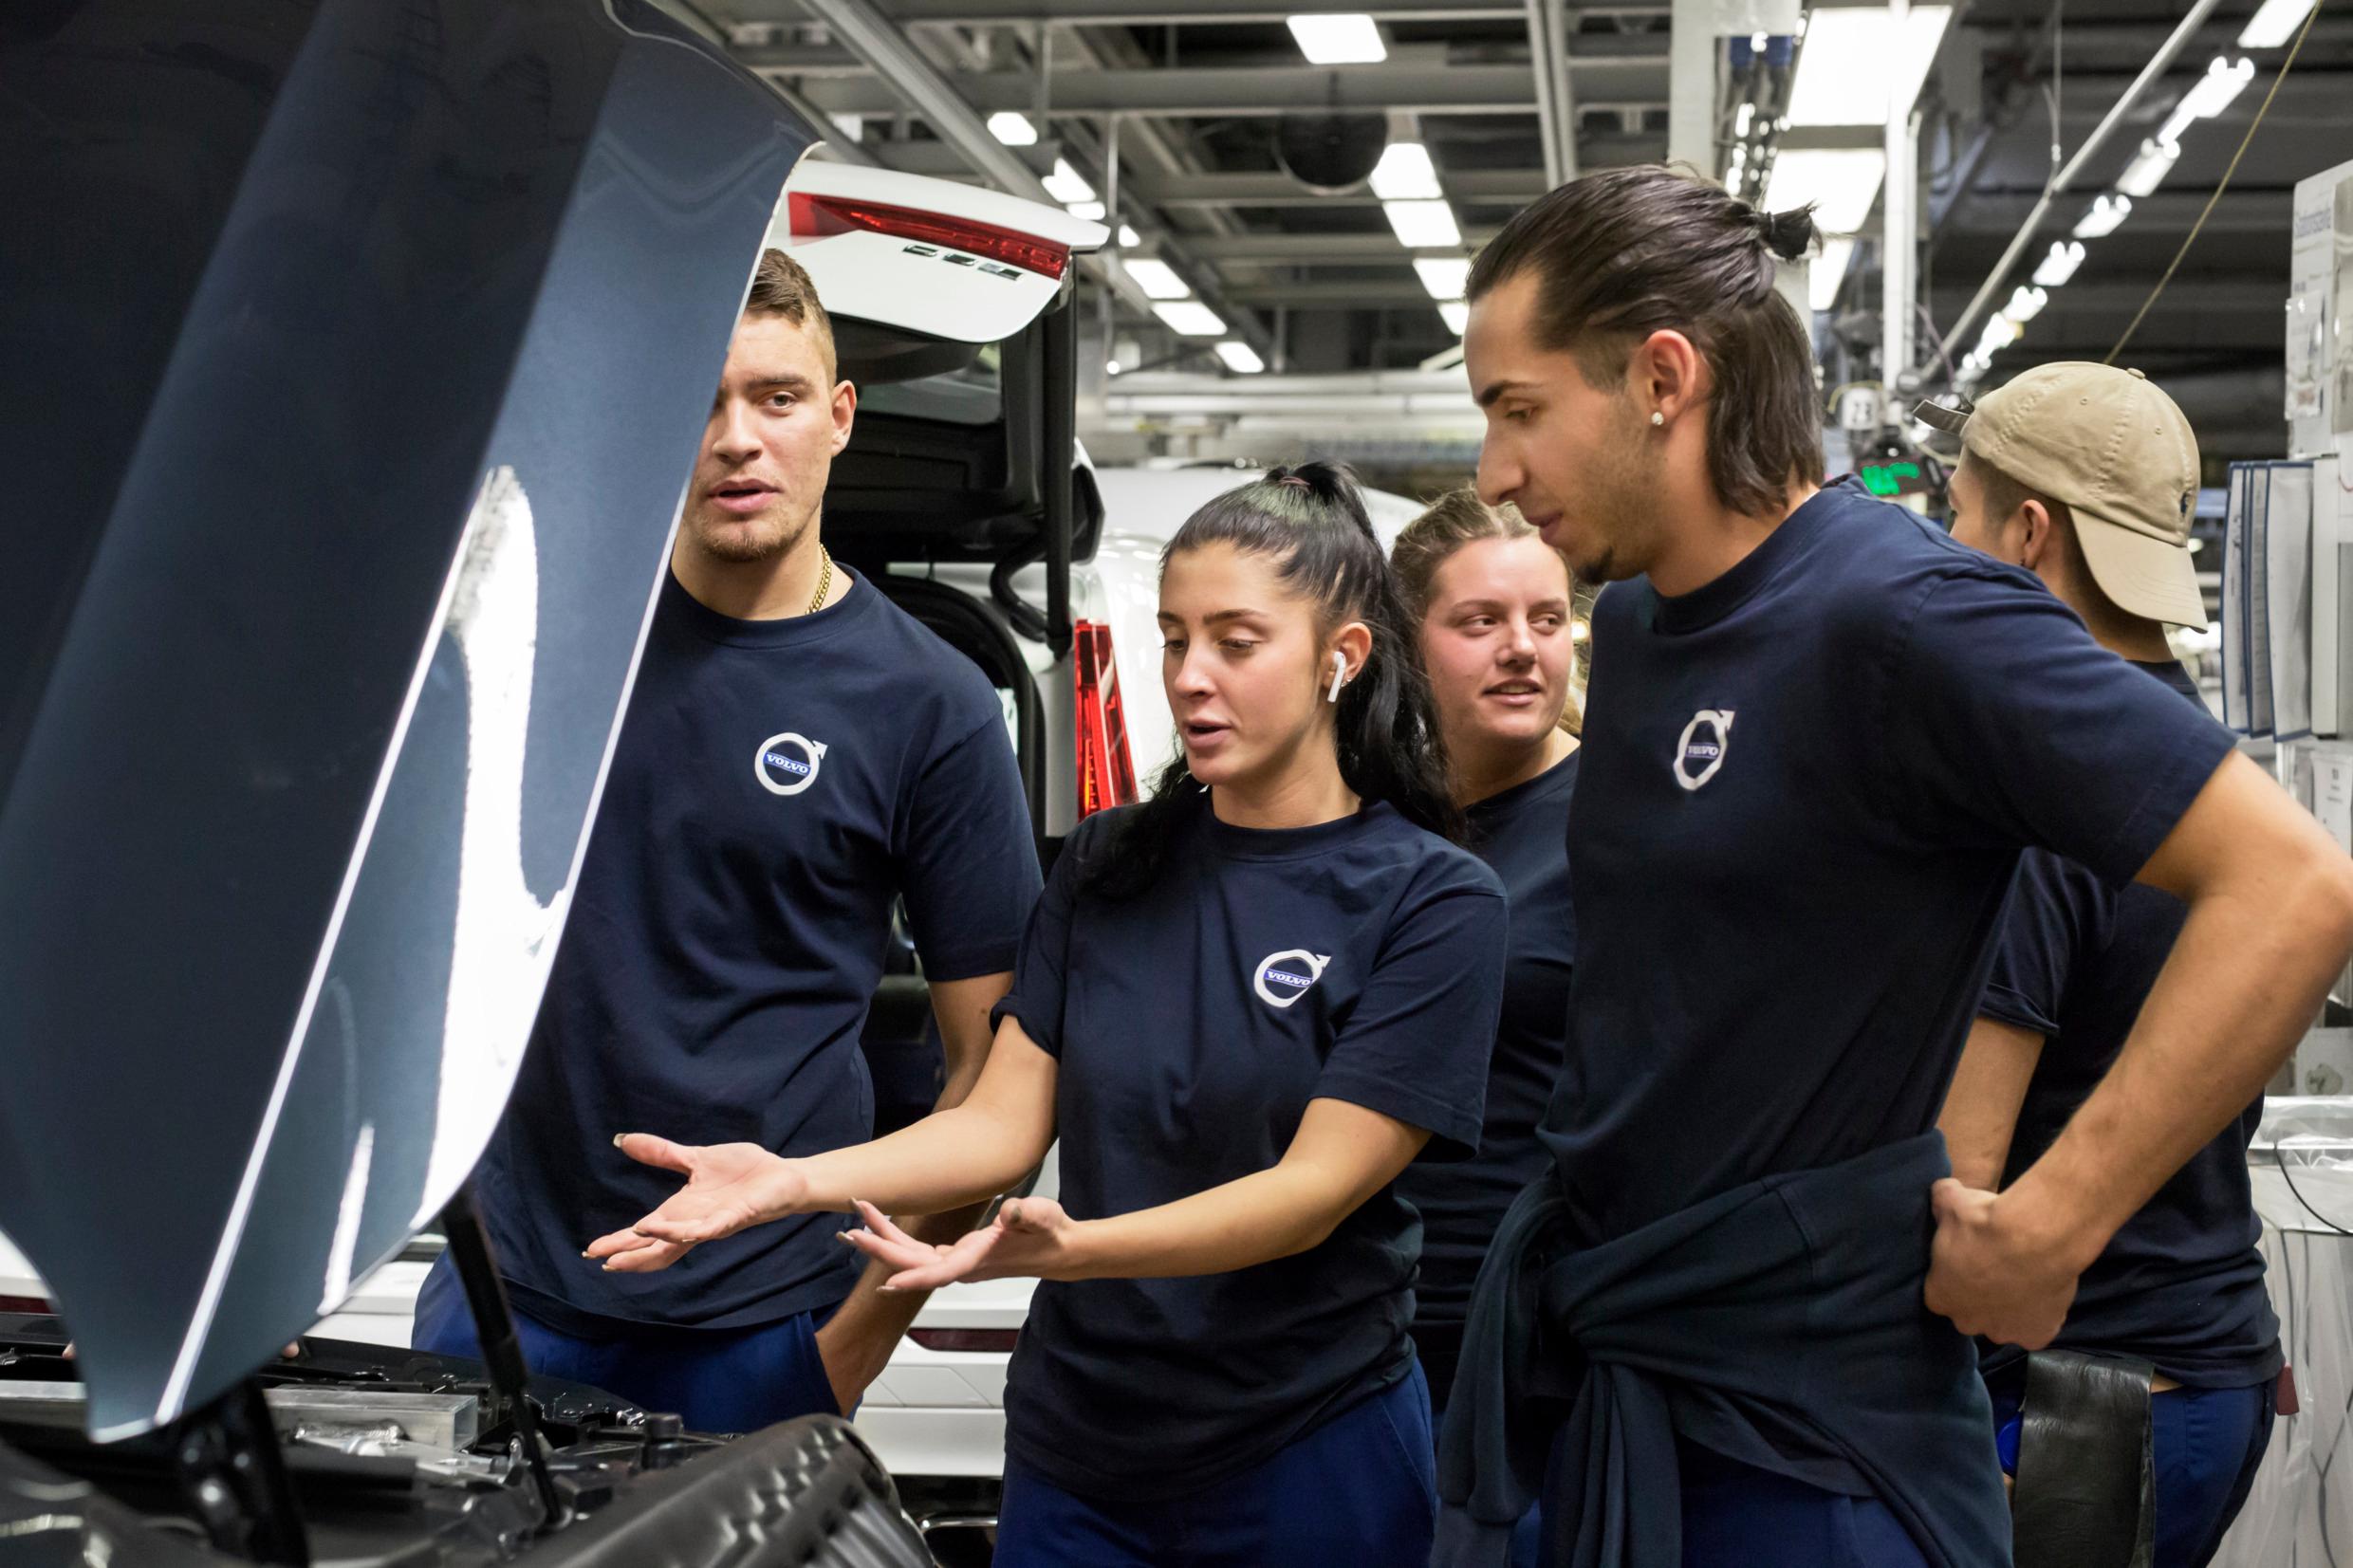 A crowd of workers stand around a car on a factory floor. A woman is gesturing at the engine compartment.